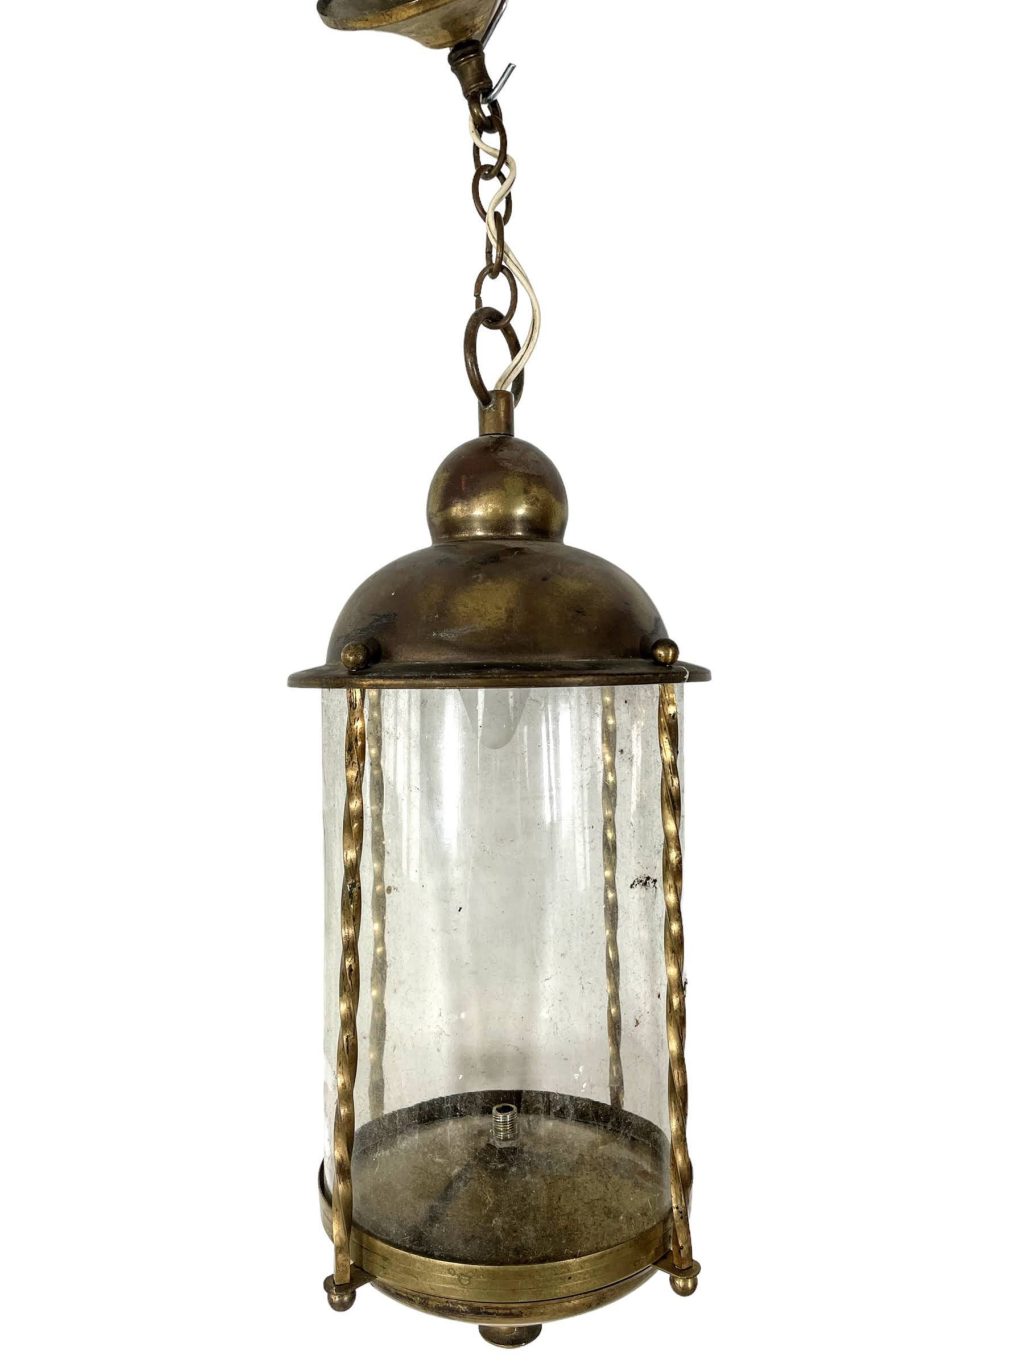 Vintage French Ornate Regency Style Hanging Pendant Light For Refurbishment Lampshade Lamp Metal Period Lighting Prop c1970-80’s / EVE